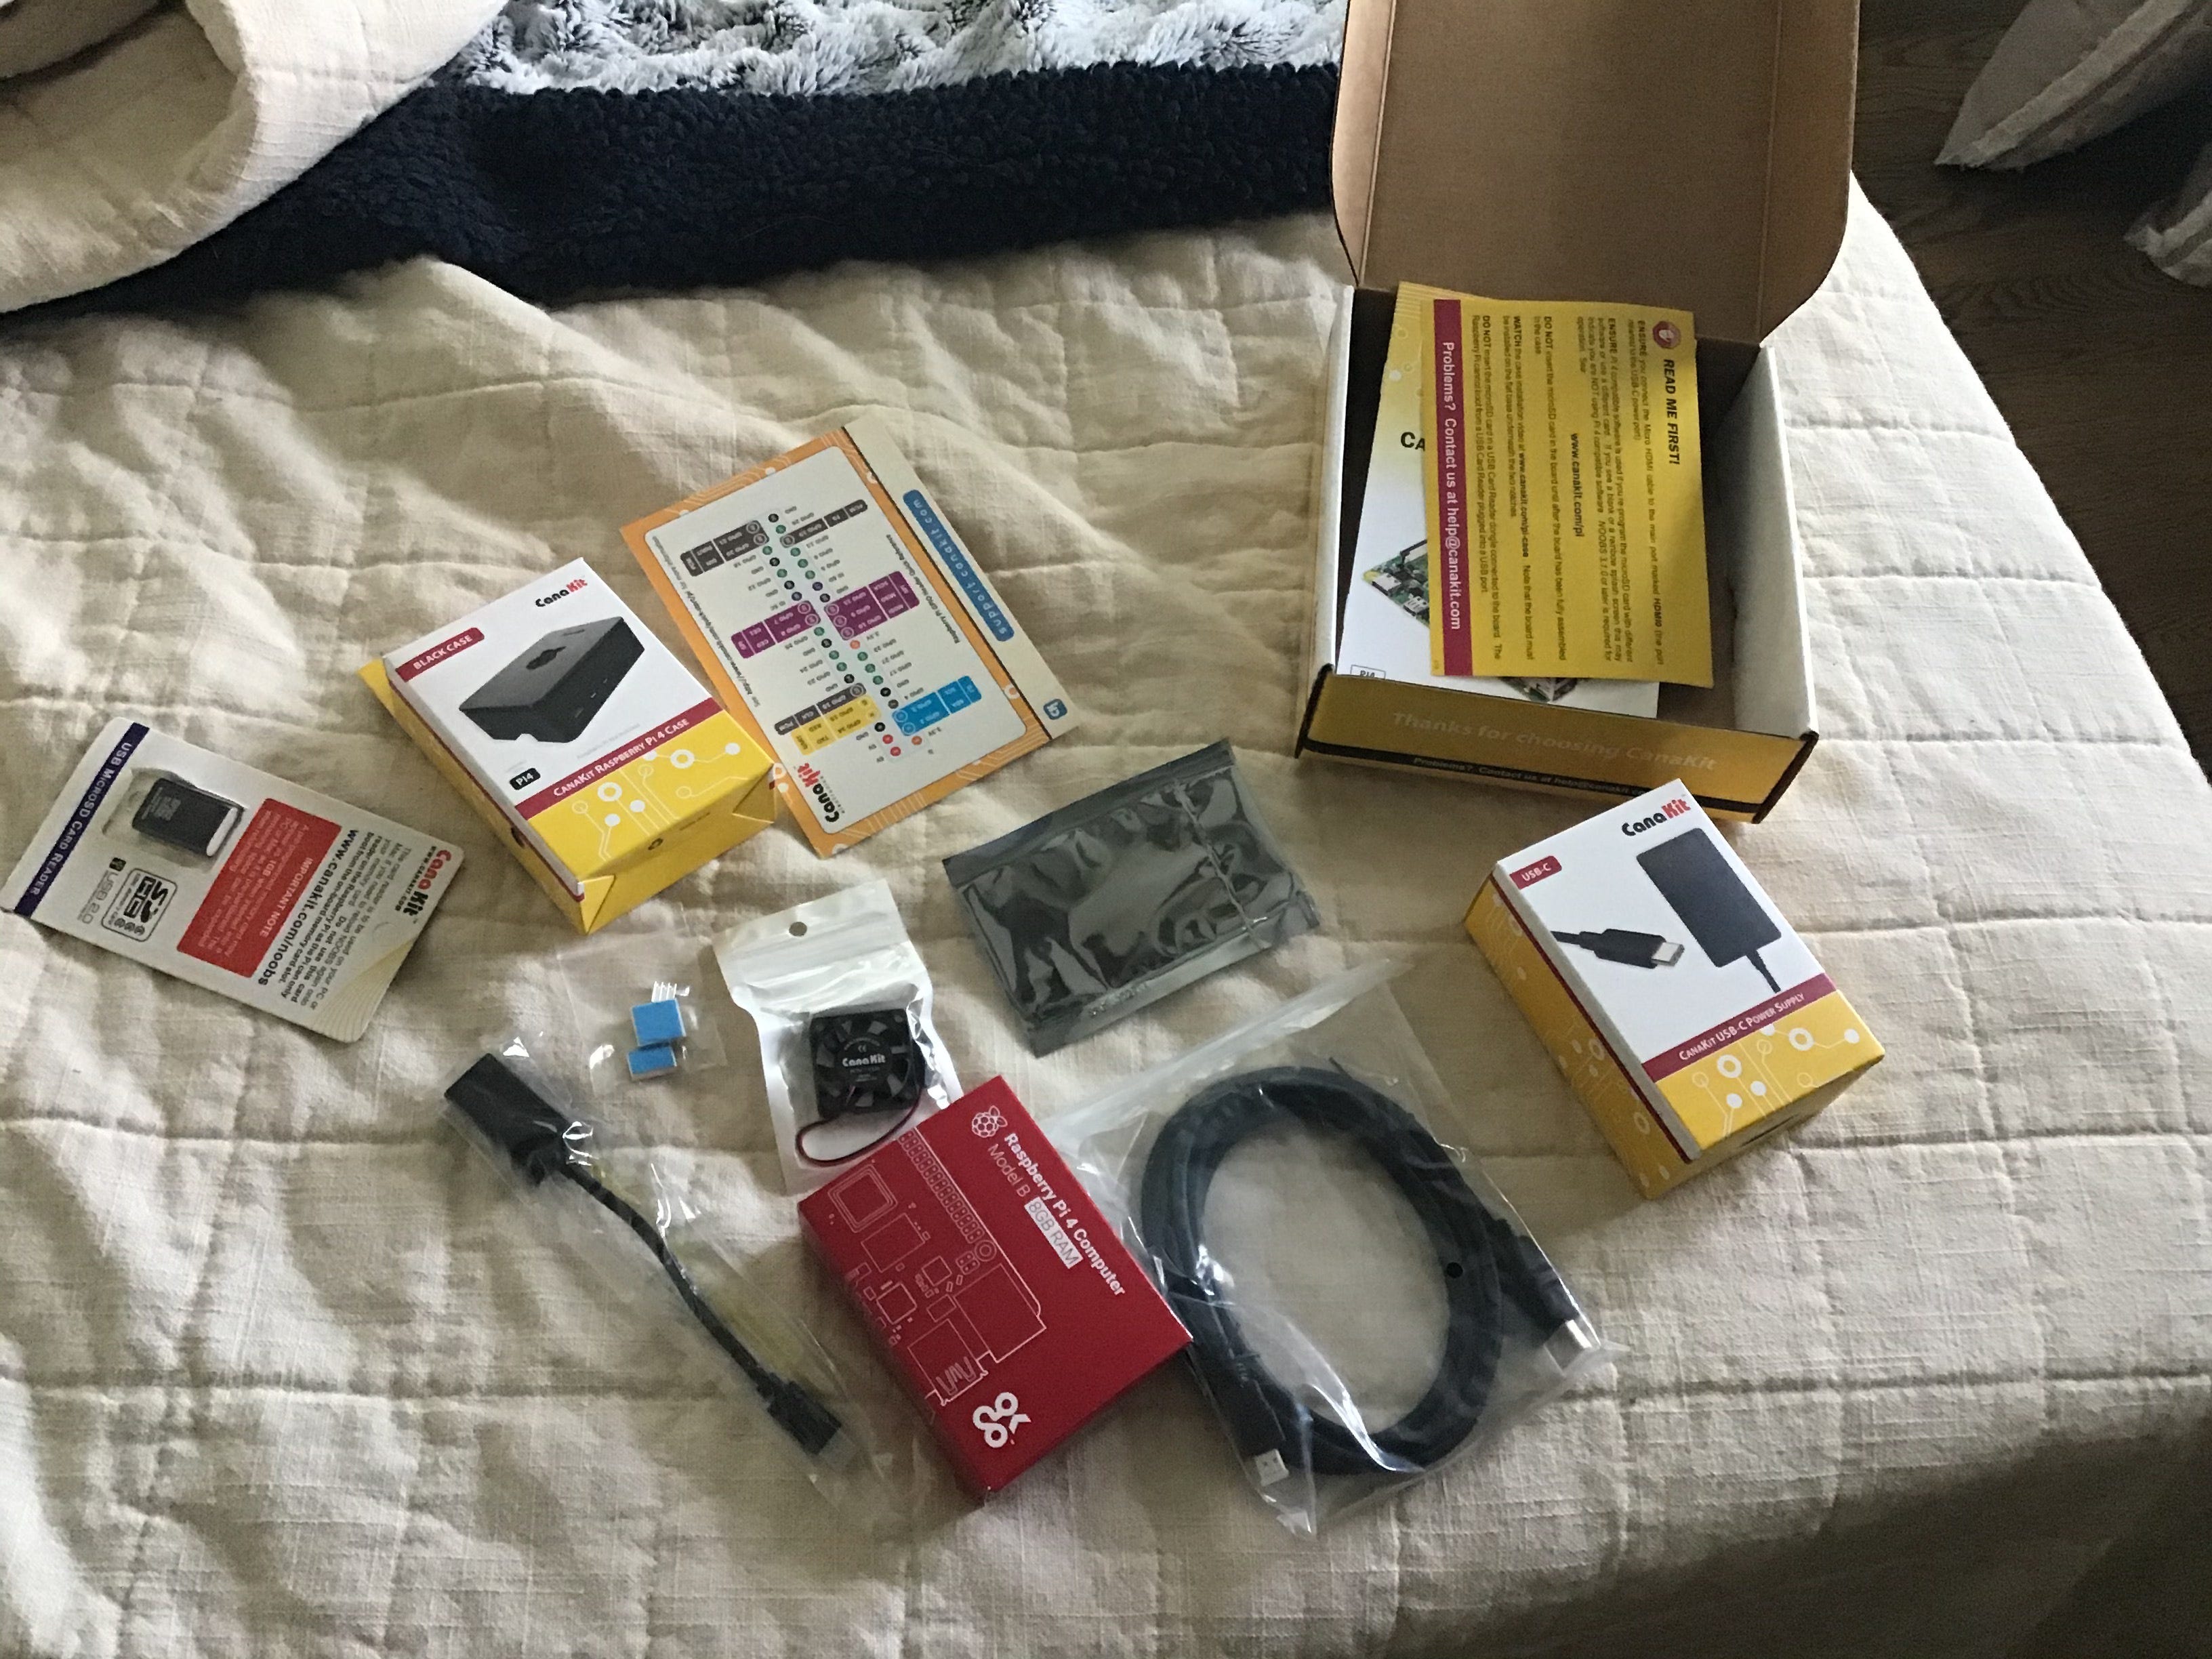 Unboxing the Raspberry Pi 4